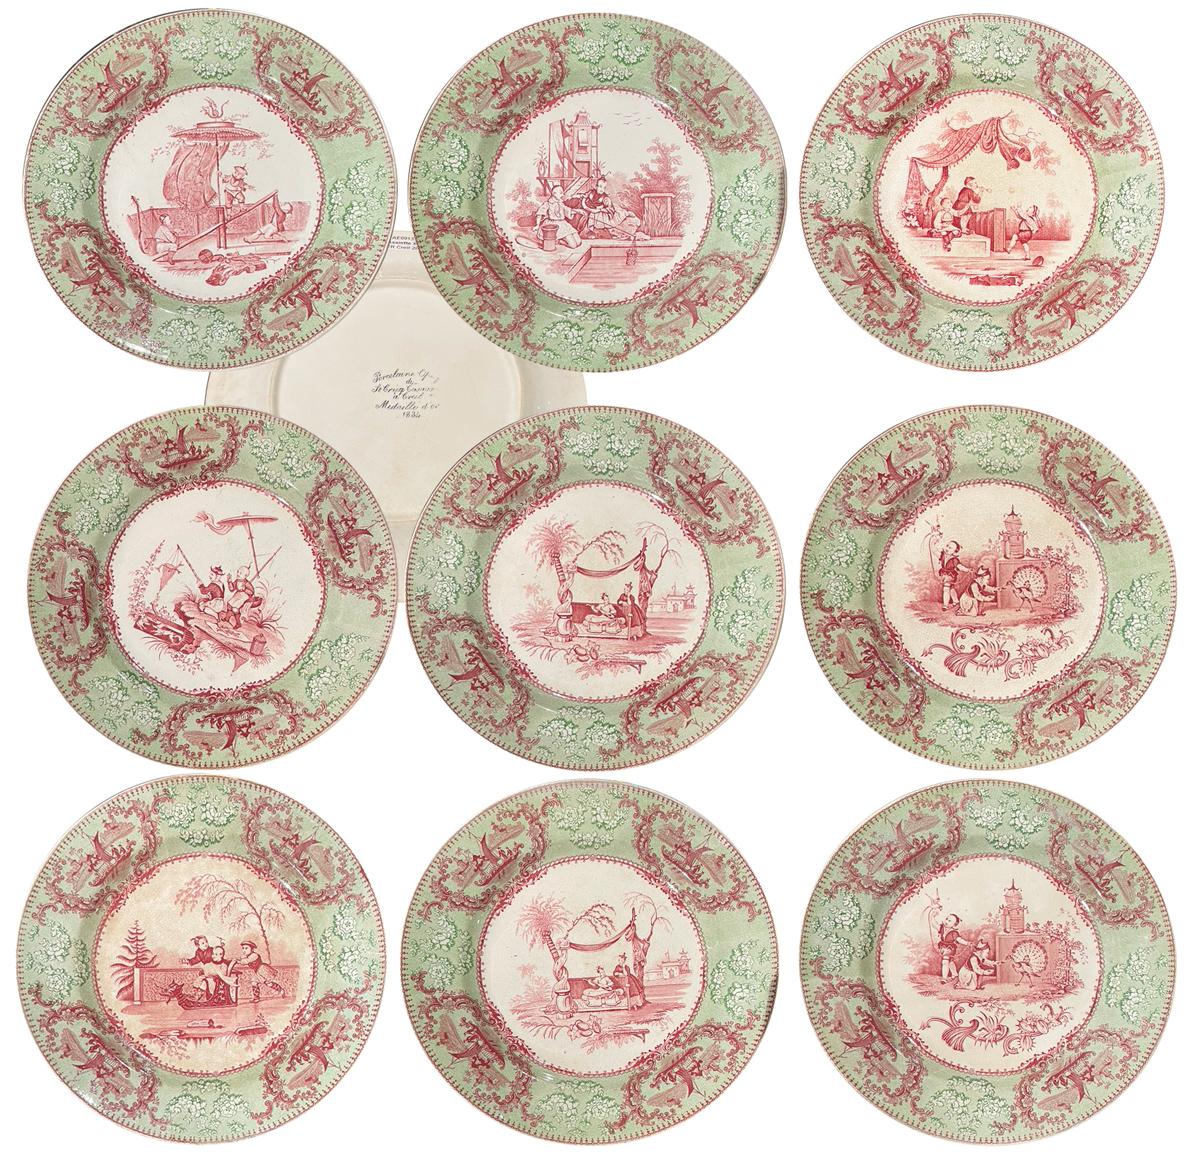 Polychromed  Romantic Chinese Scenes Fine Earthenware 8 Plates by Creil 1834-1840  For Sale